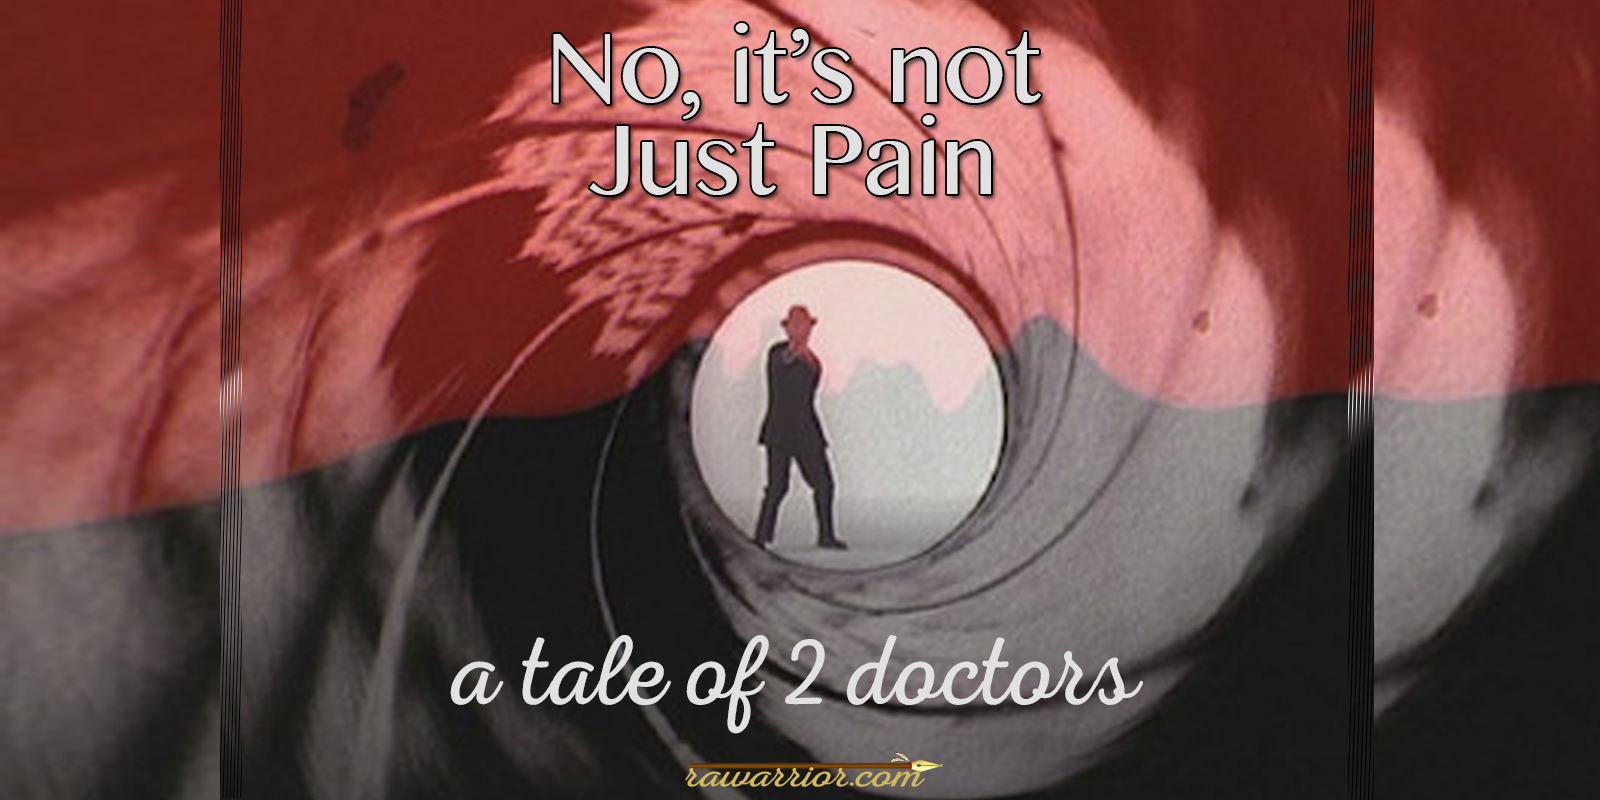 It’s Just Pain, Right? No, Dr. No, It’s Not